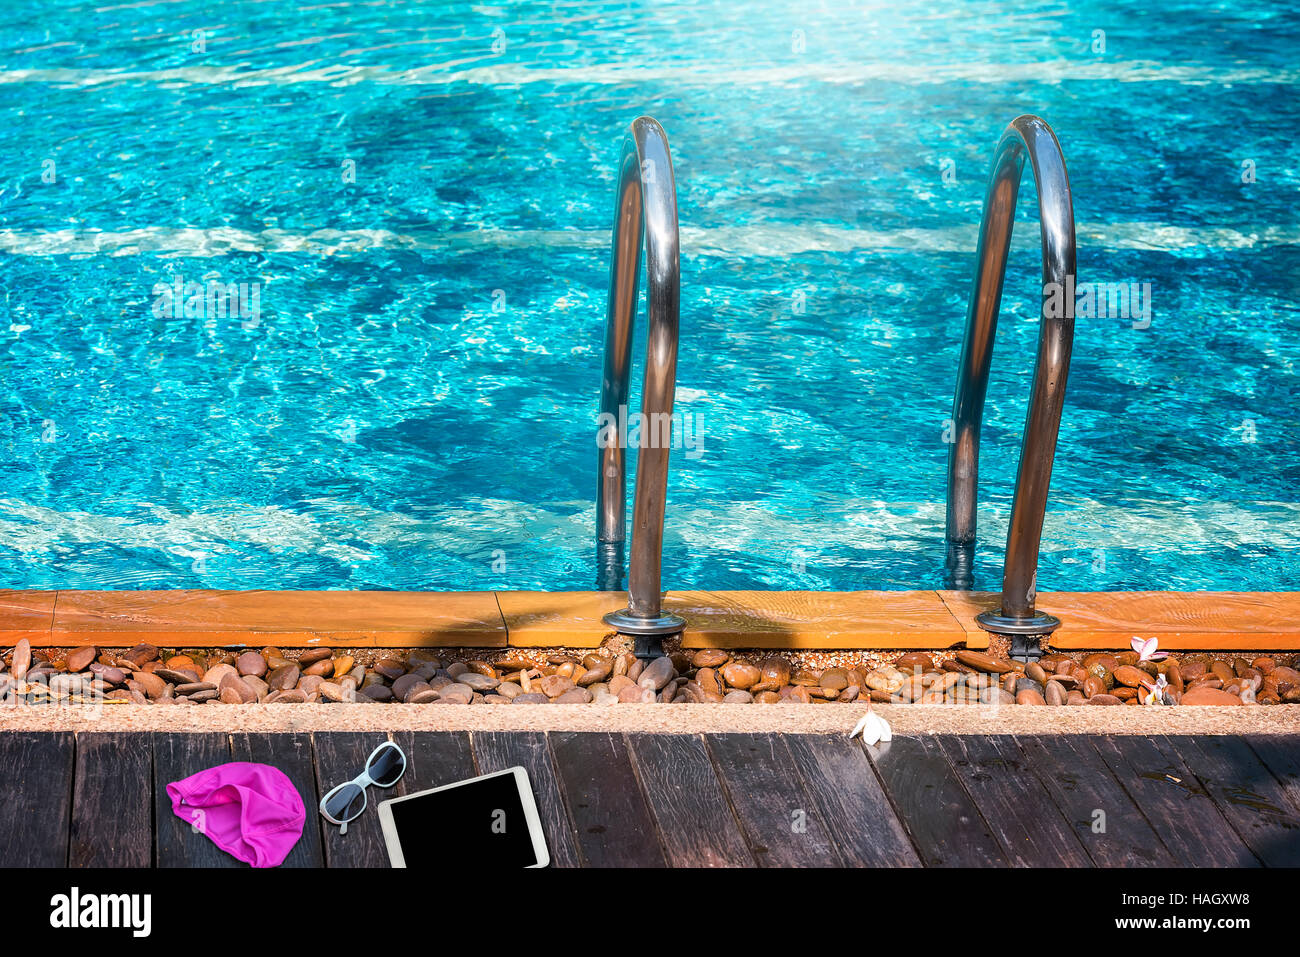 Swimming pool with stair with day light Stock Photo